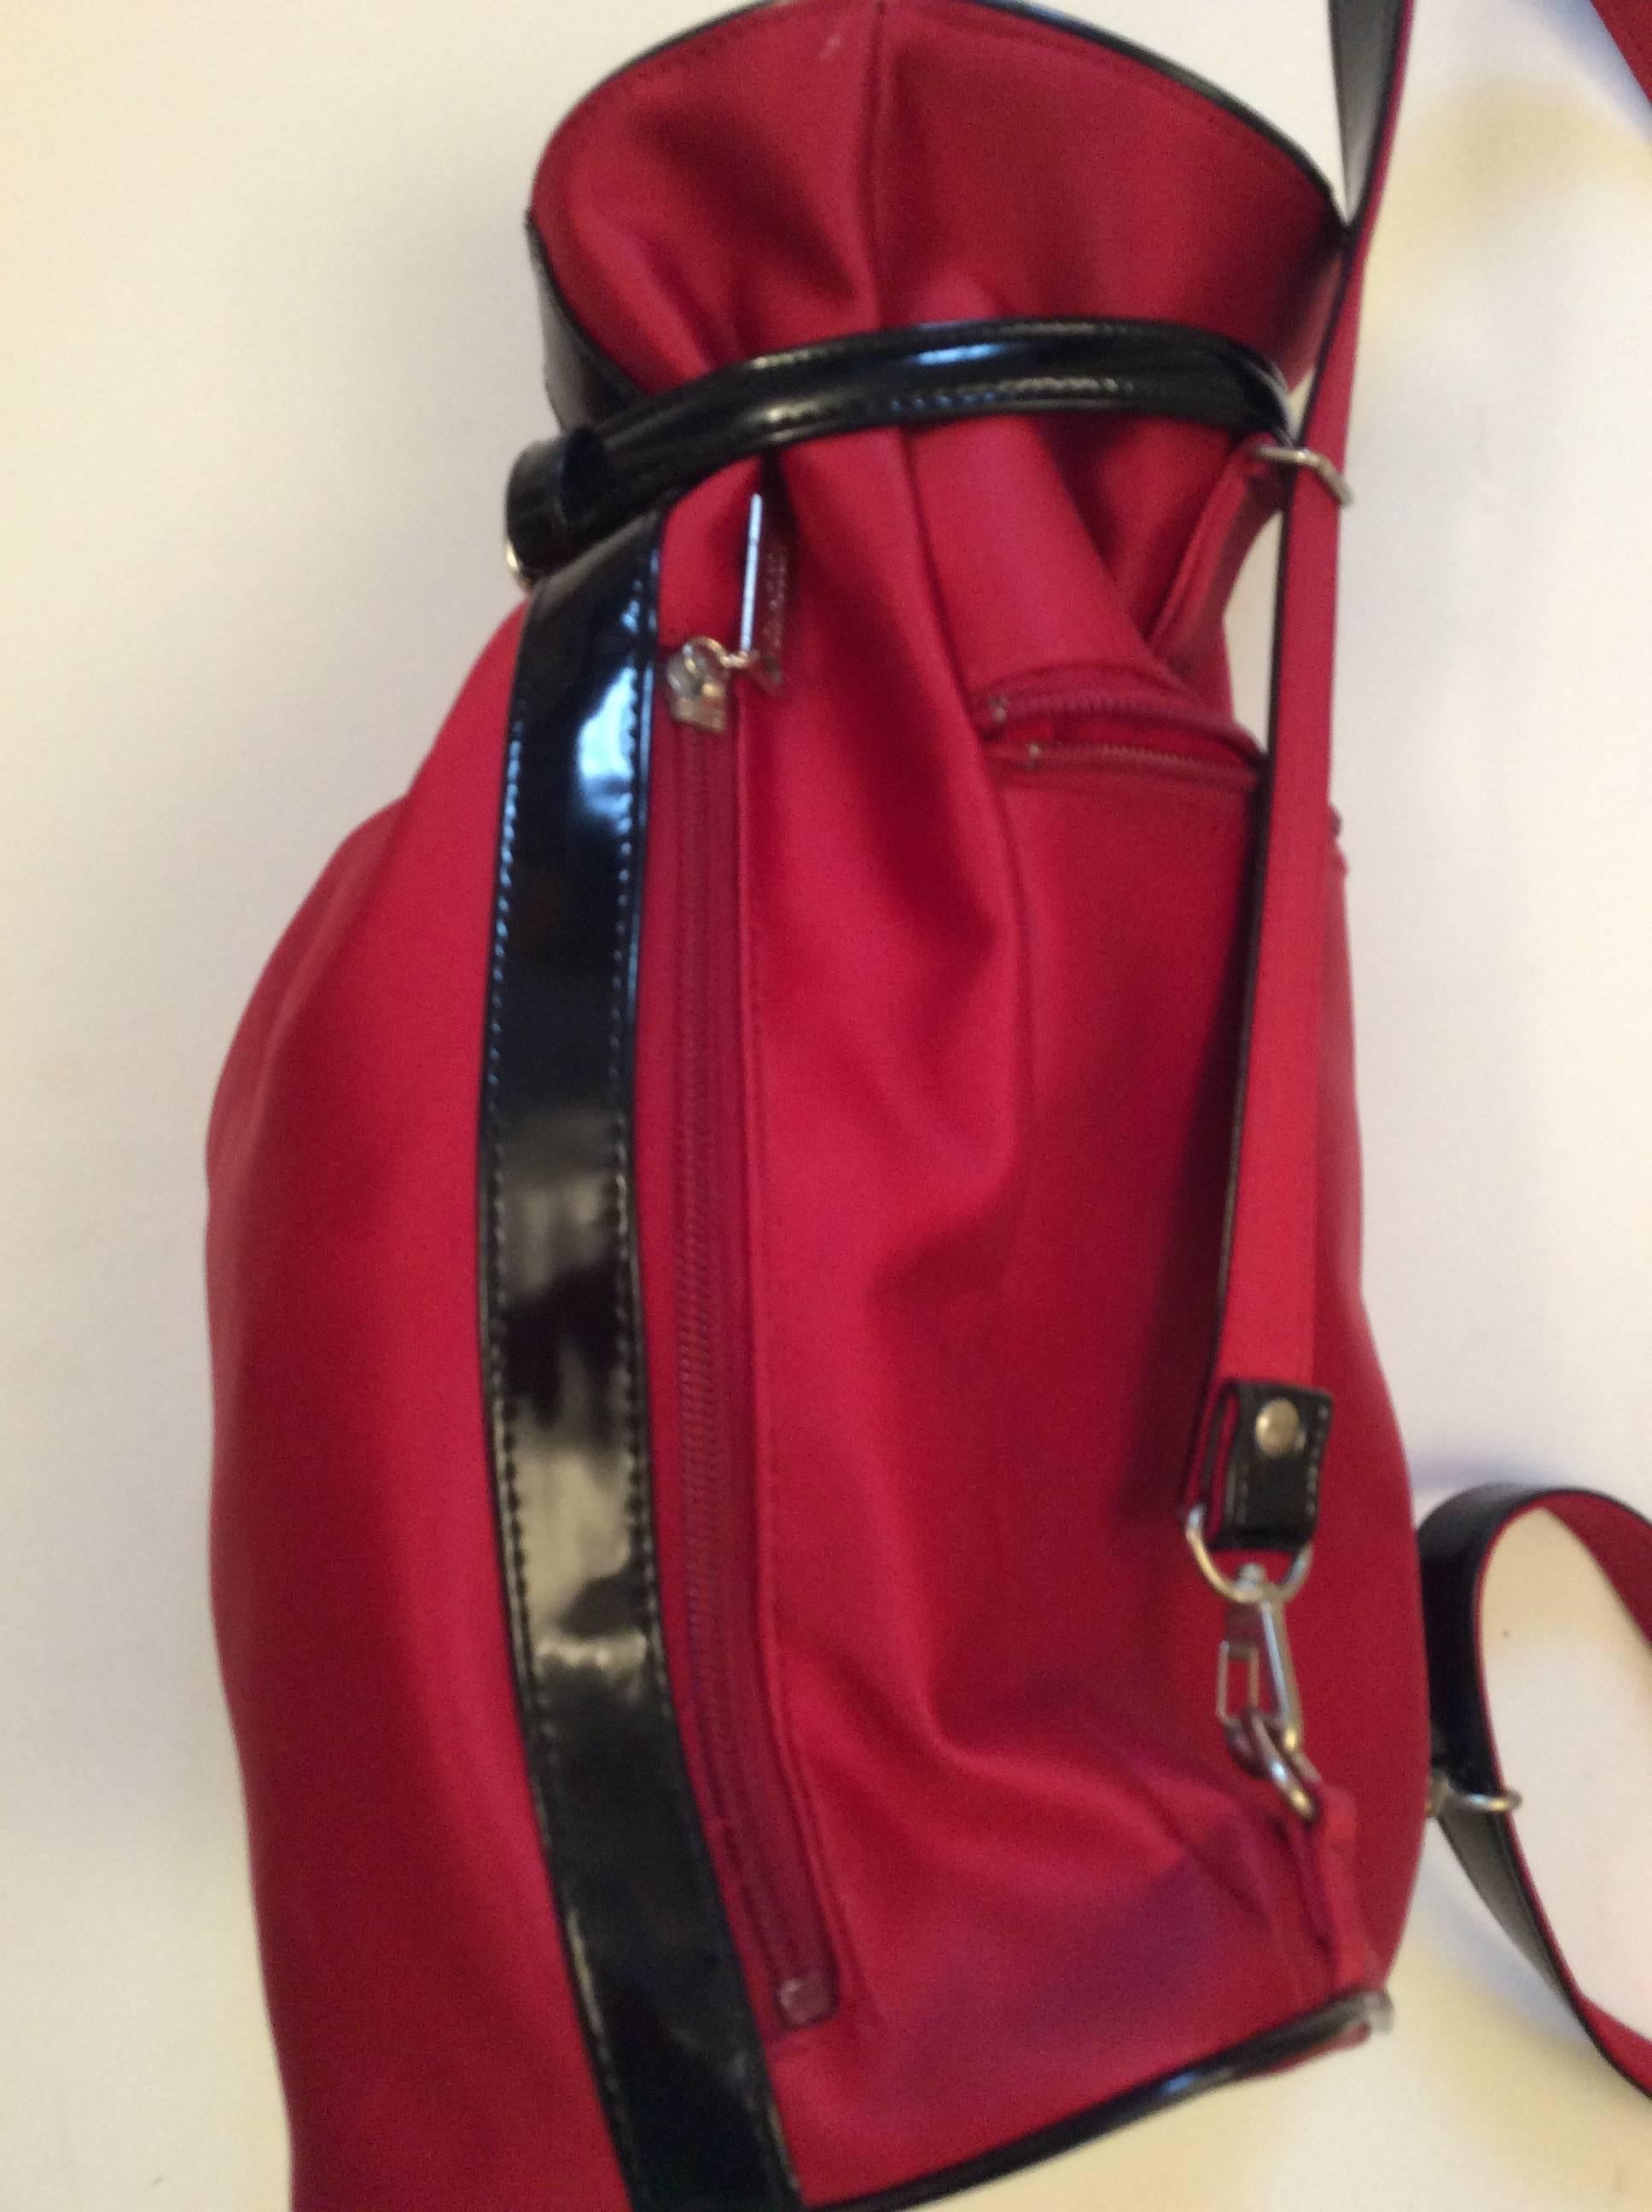 New Moschino Cheap and Chic Backpack / Purse In Excellent Condition For Sale In Boca Raton, FL